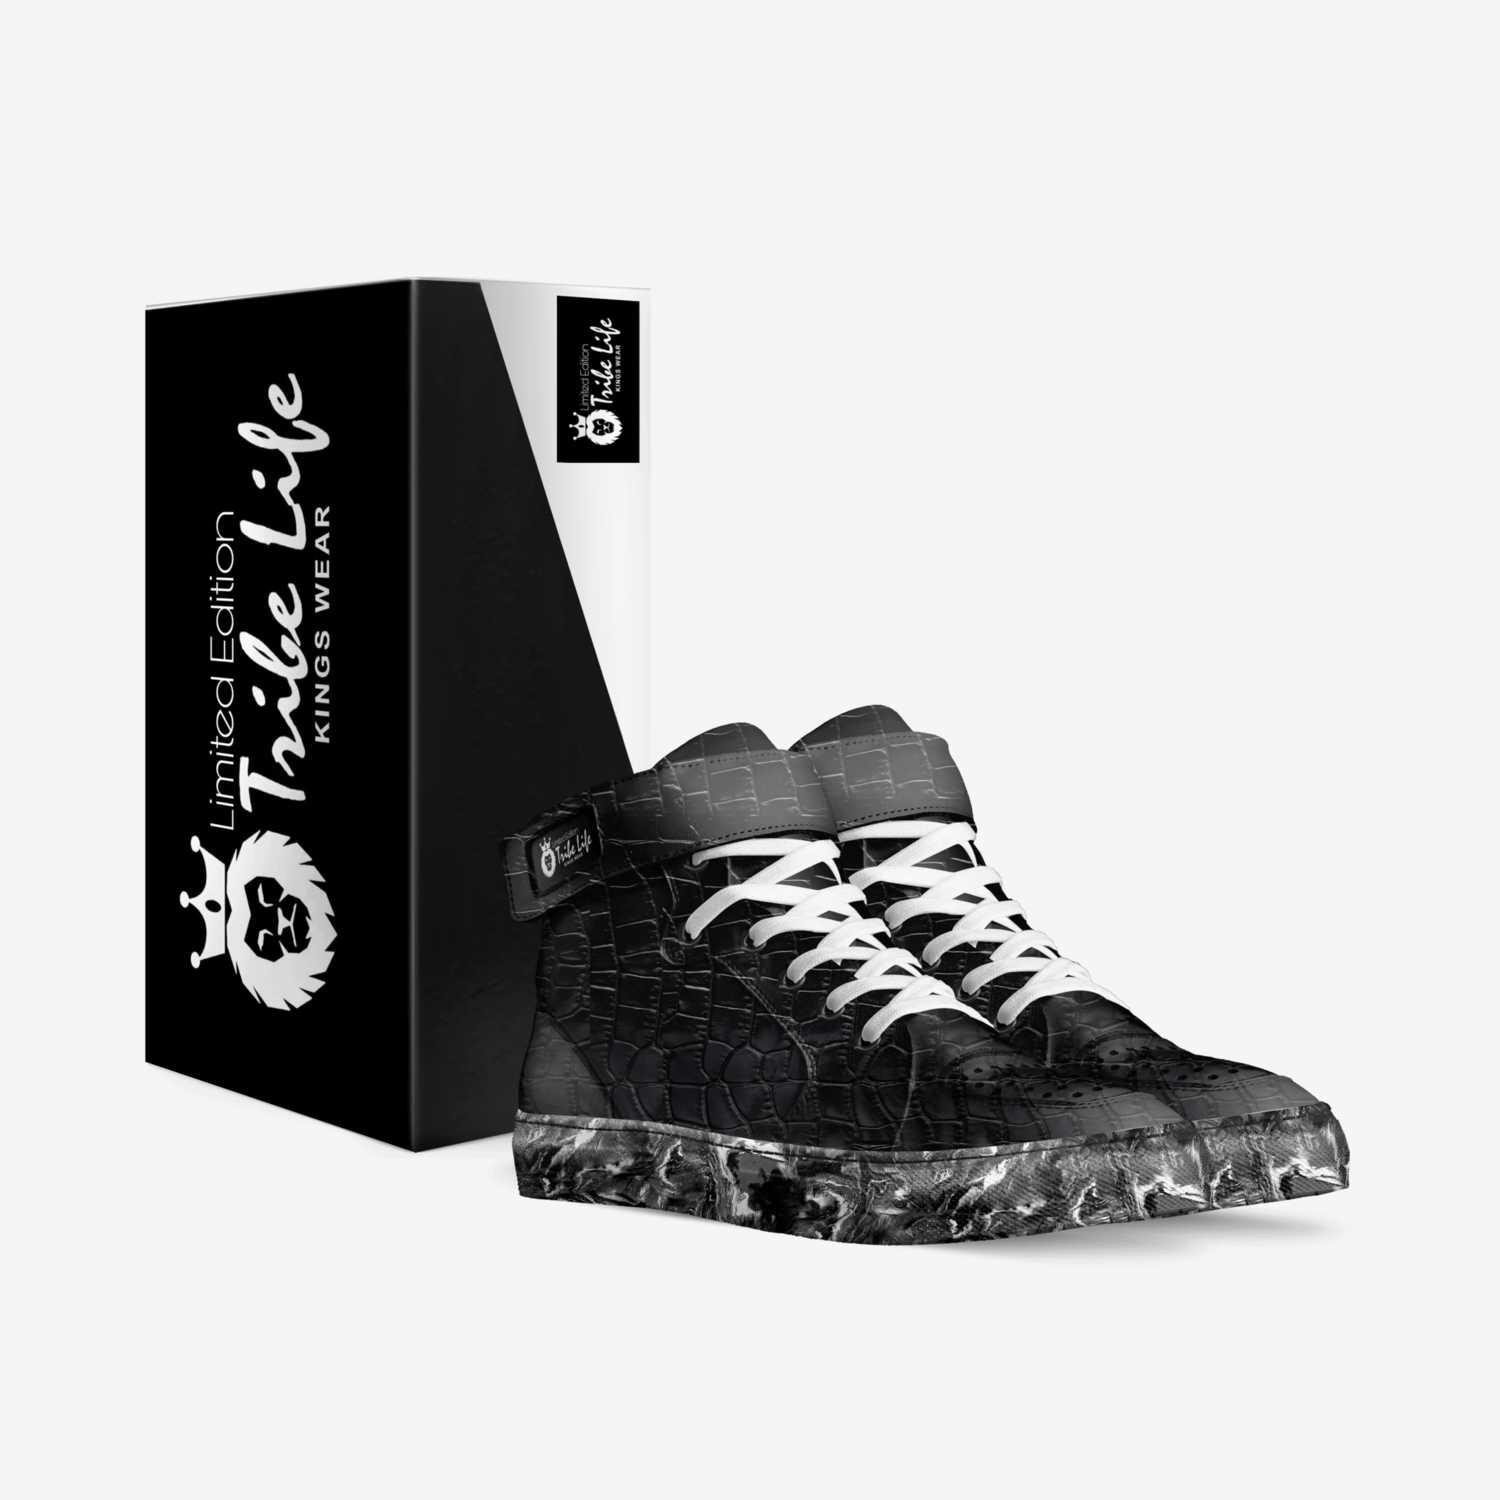 Tribe Life custom made in Italy shoes by Travis Grace | Box view